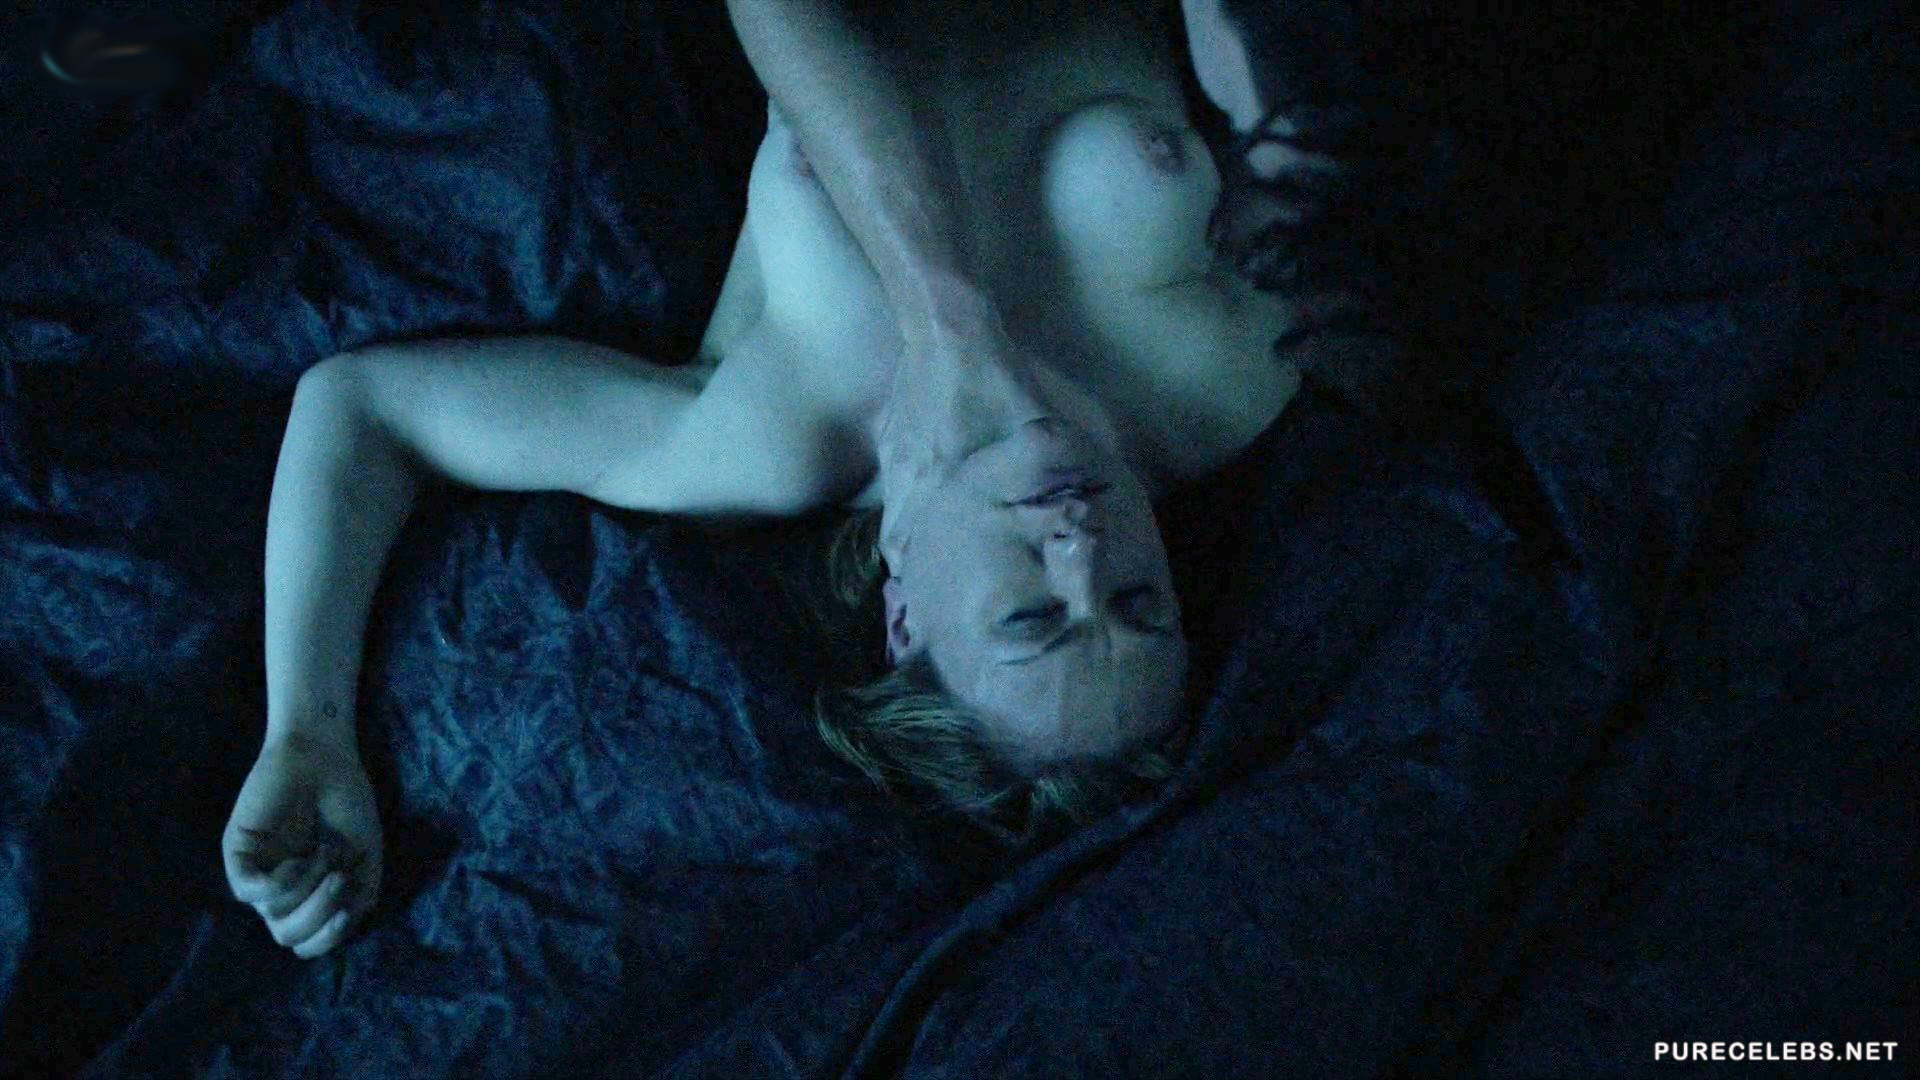 Leaked Anna Paquin & Maura Tierney Nude And Rough Sex Actions Scenes In...